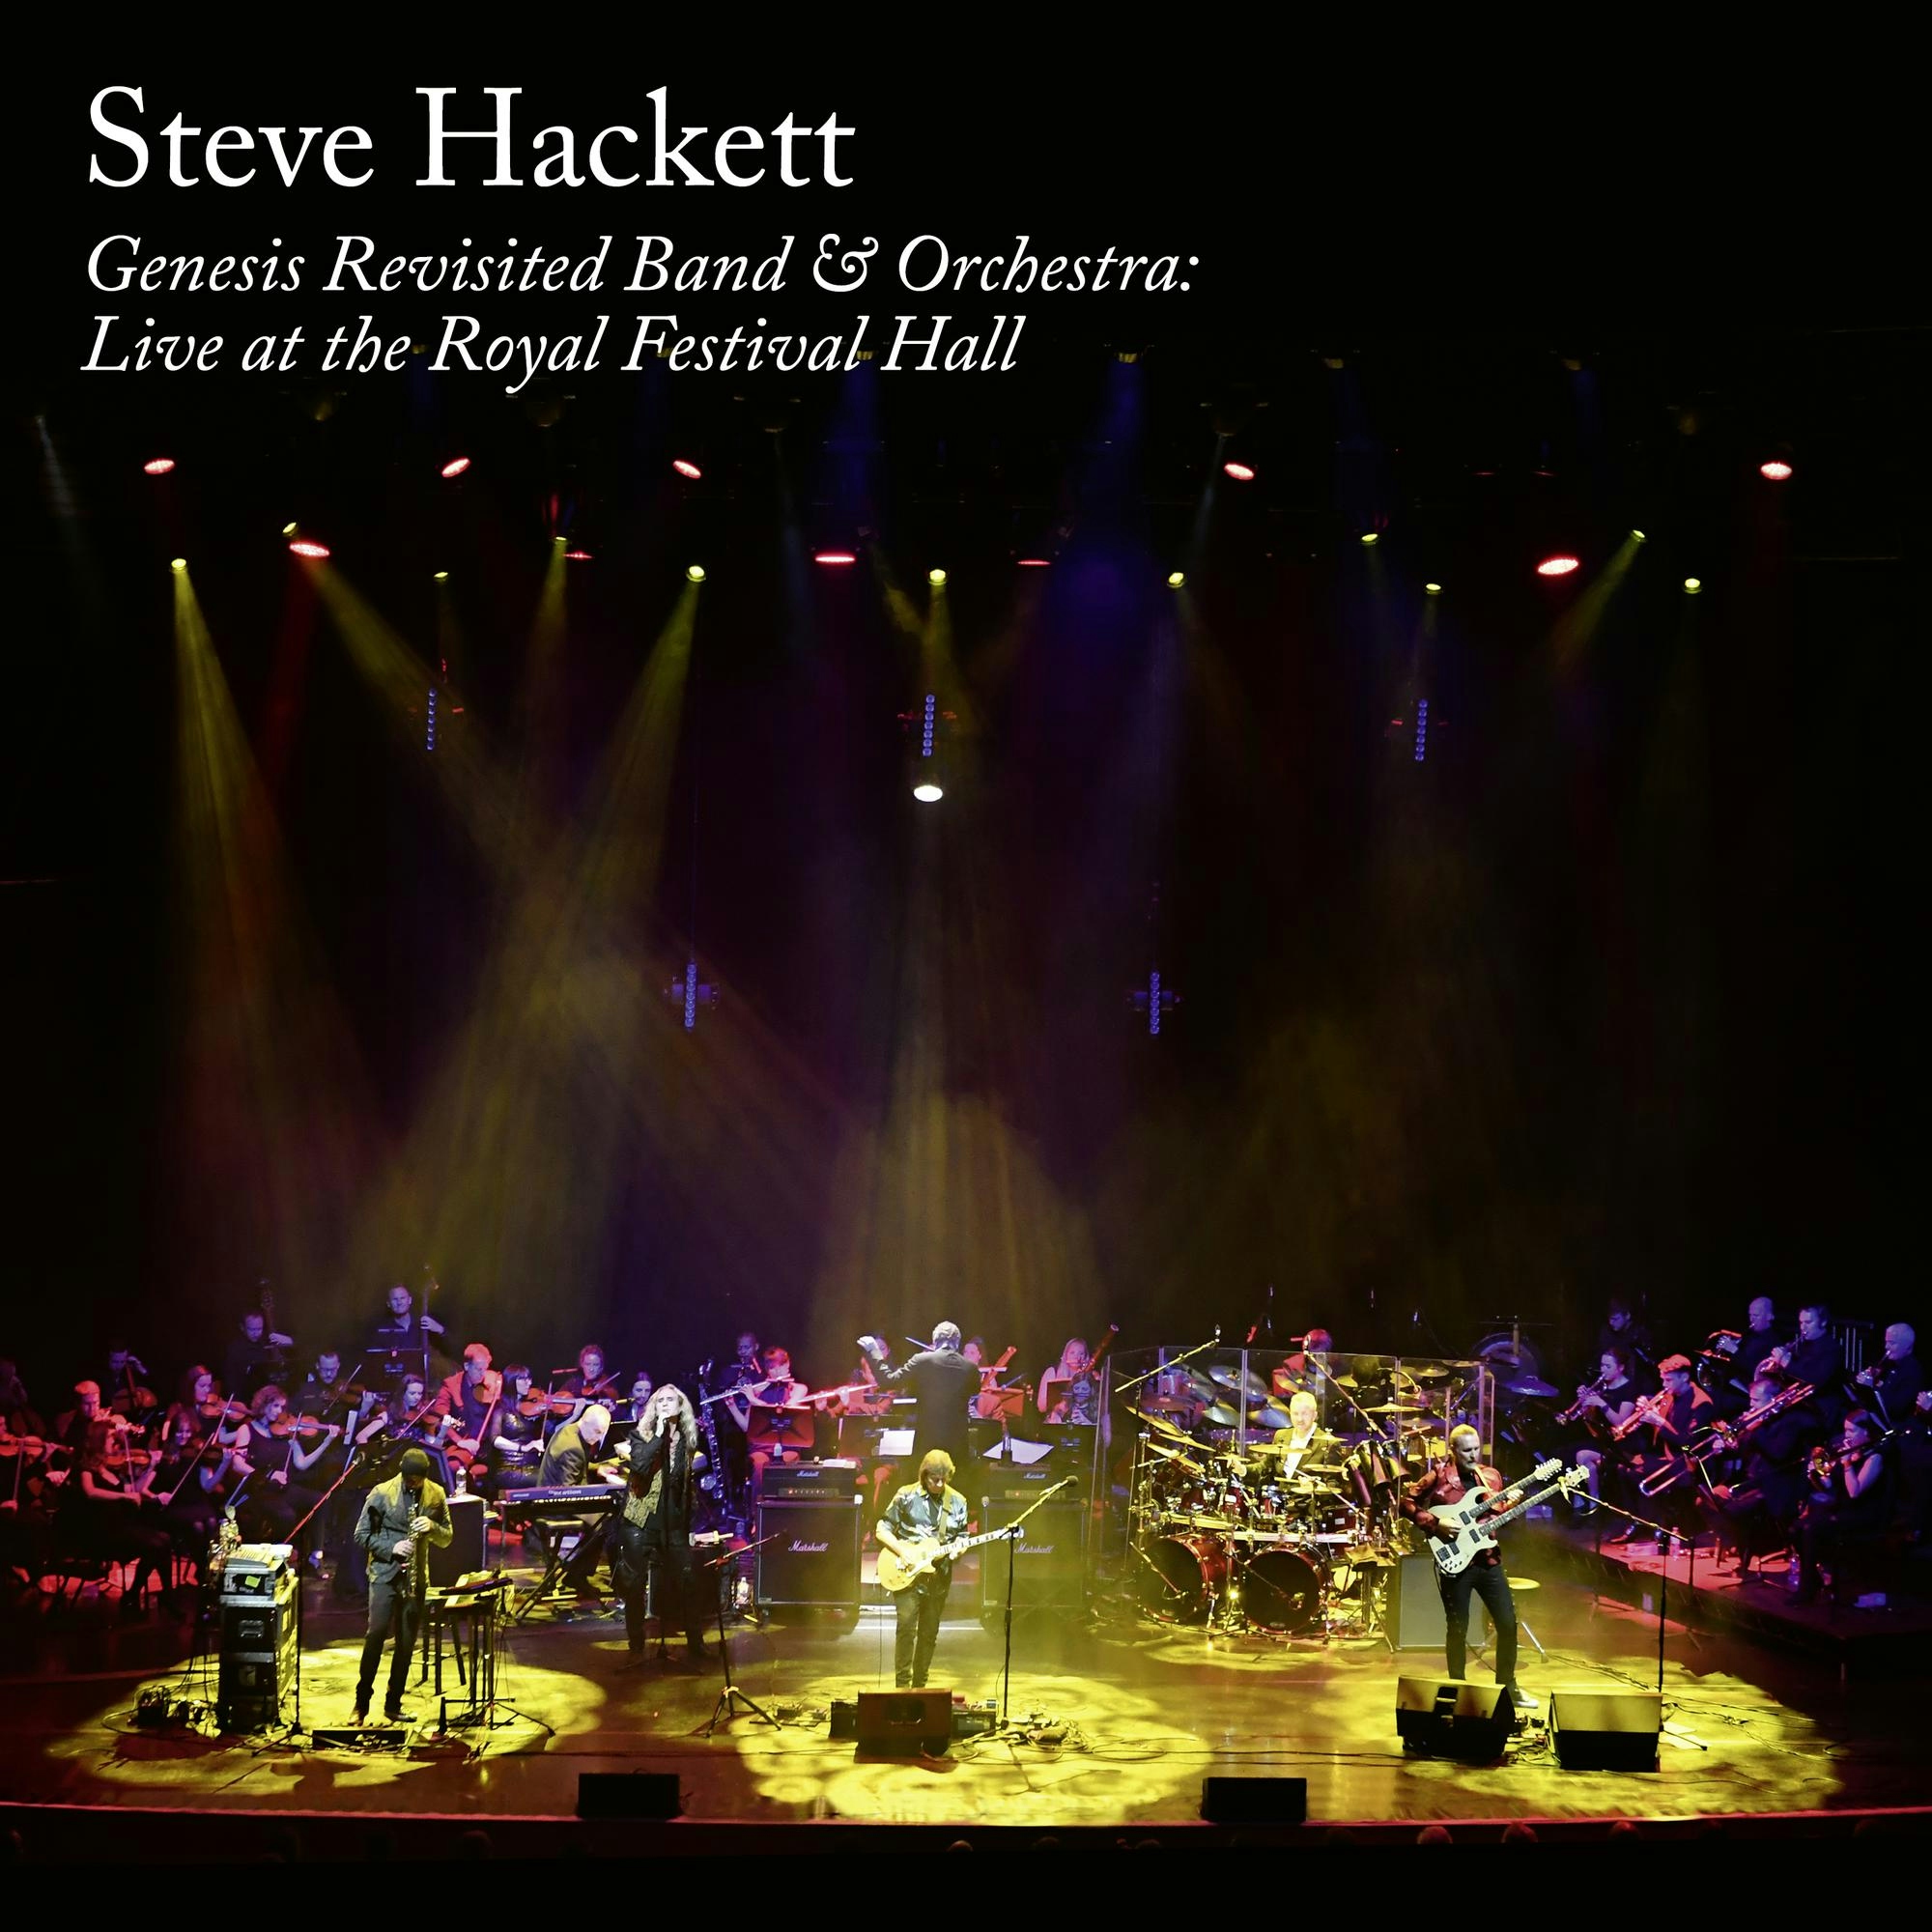 Album artwork for Album artwork for Genesis Revisited Band & Orchestra: Live by Steve Hackett by Genesis Revisited Band & Orchestra: Live - Steve Hackett